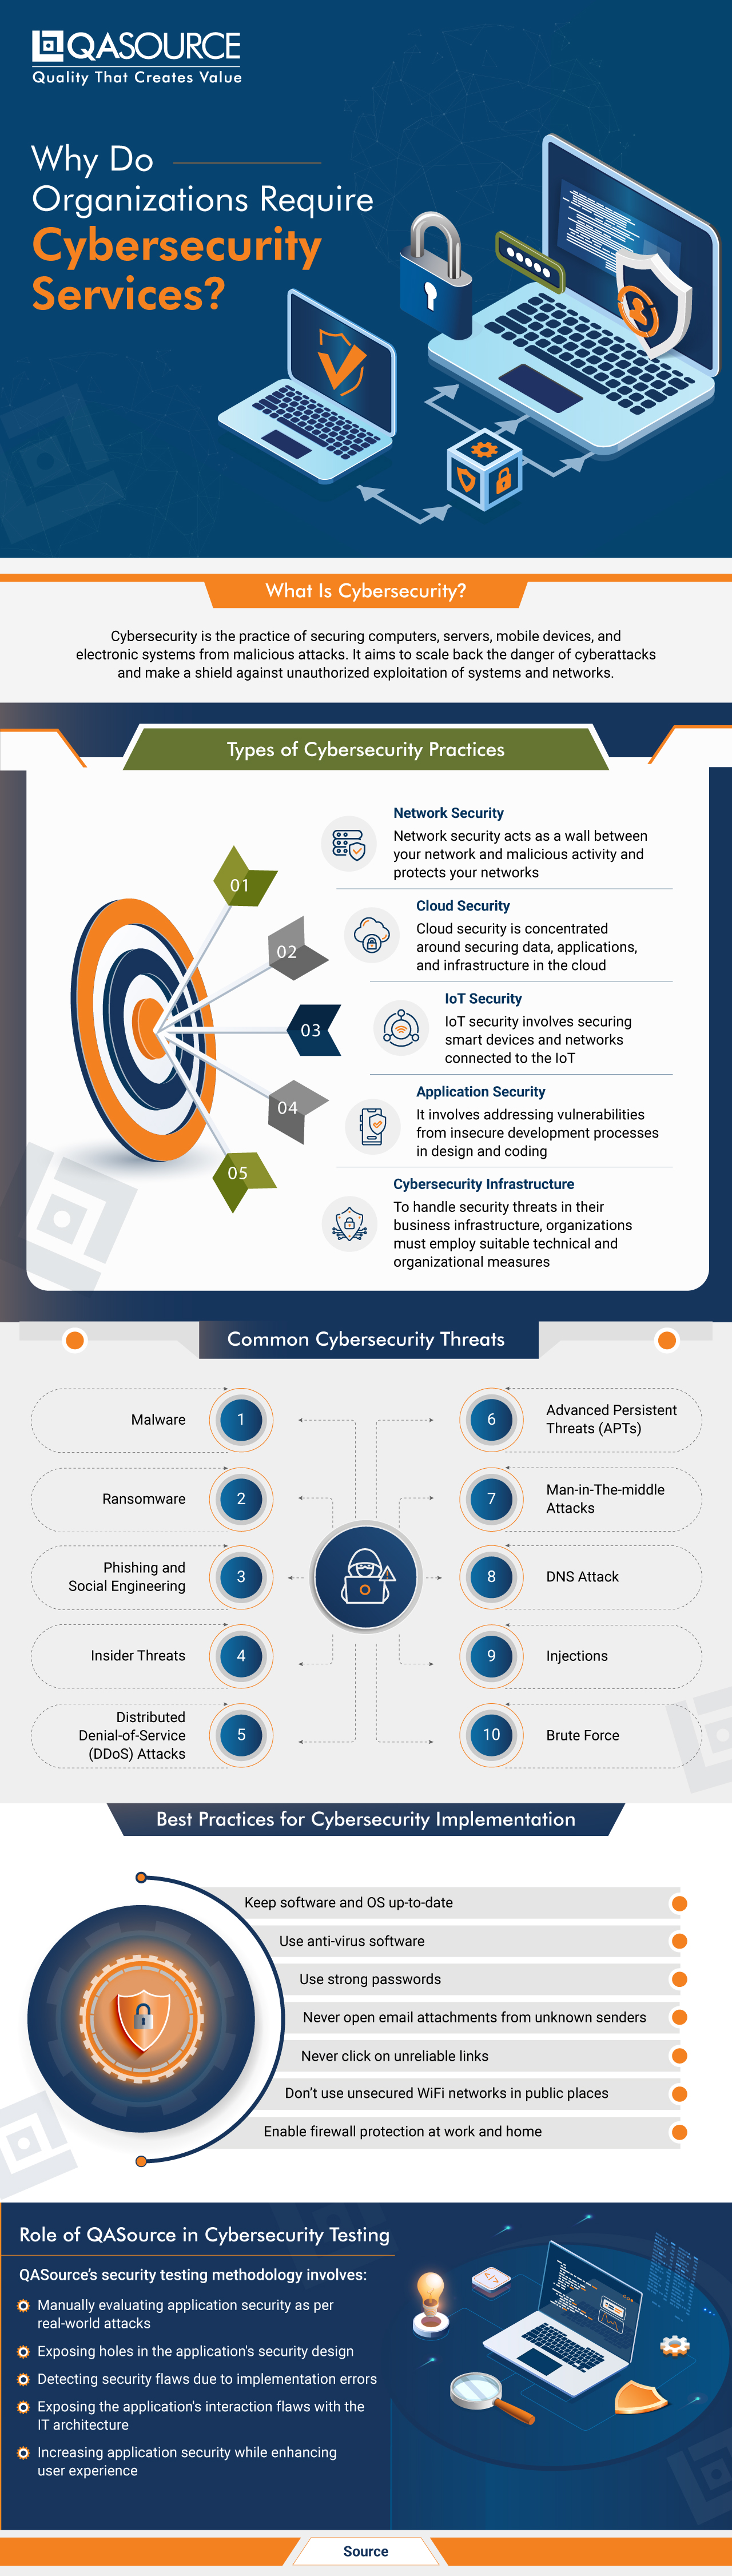 Why Do Organizations Require Cybersecurity Services? (Infographic)